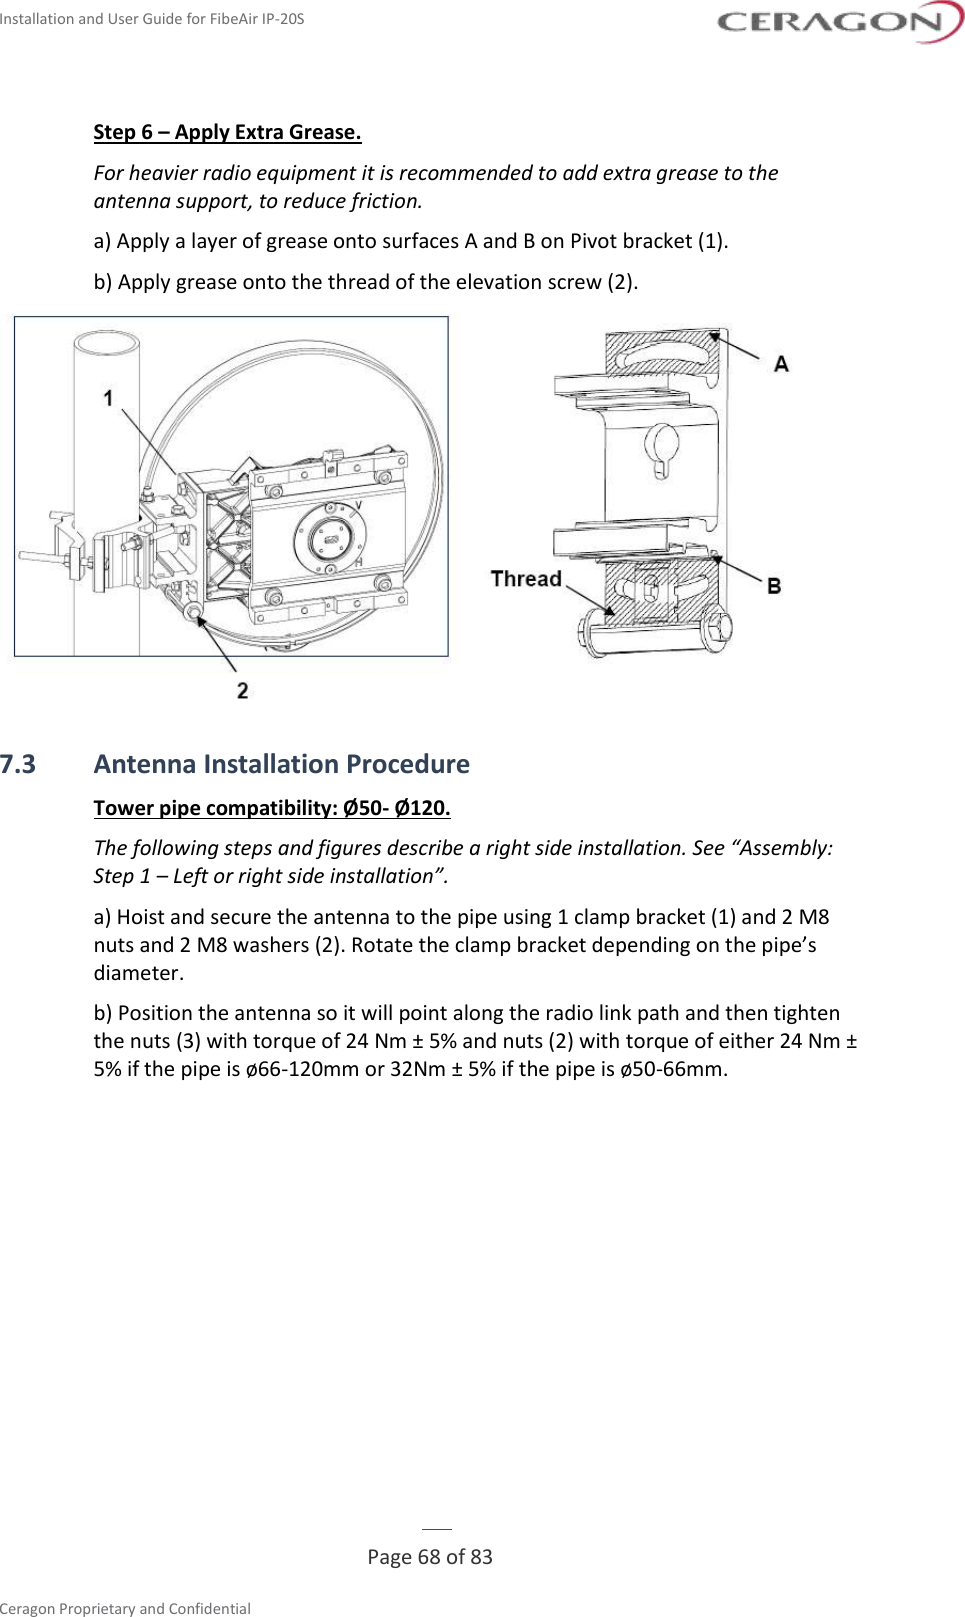 Installation and User Guide for FibeAir IP-20S   Page 68 of 83  Ceragon Proprietary and Confidential     Step 6 – Apply Extra Grease. For heavier radio equipment it is recommended to add extra grease to the antenna support, to reduce friction. a) Apply a layer of grease onto surfaces A and B on Pivot bracket (1). b) Apply grease onto the thread of the elevation screw (2).  7.3 Antenna Installation Procedure Tower pipe compatibility: Ø50- Ø120. The following steps and figures describe a right side installation. See “Assembly: Step 1 – Left or right side installation”. a) Hoist and secure the antenna to the pipe using 1 clamp bracket (1) and 2 M8 nuts and 2 M8 washers (2). Rotate the clamp bracket depending on the pipe’s diameter. b) Position the antenna so it will point along the radio link path and then tighten the nuts (3) with torque of 24 Nm ± 5% and nuts (2) with torque of either 24 Nm ± 5% if the pipe is ø66-120mm or 32Nm ± 5% if the pipe is ø50-66mm. 